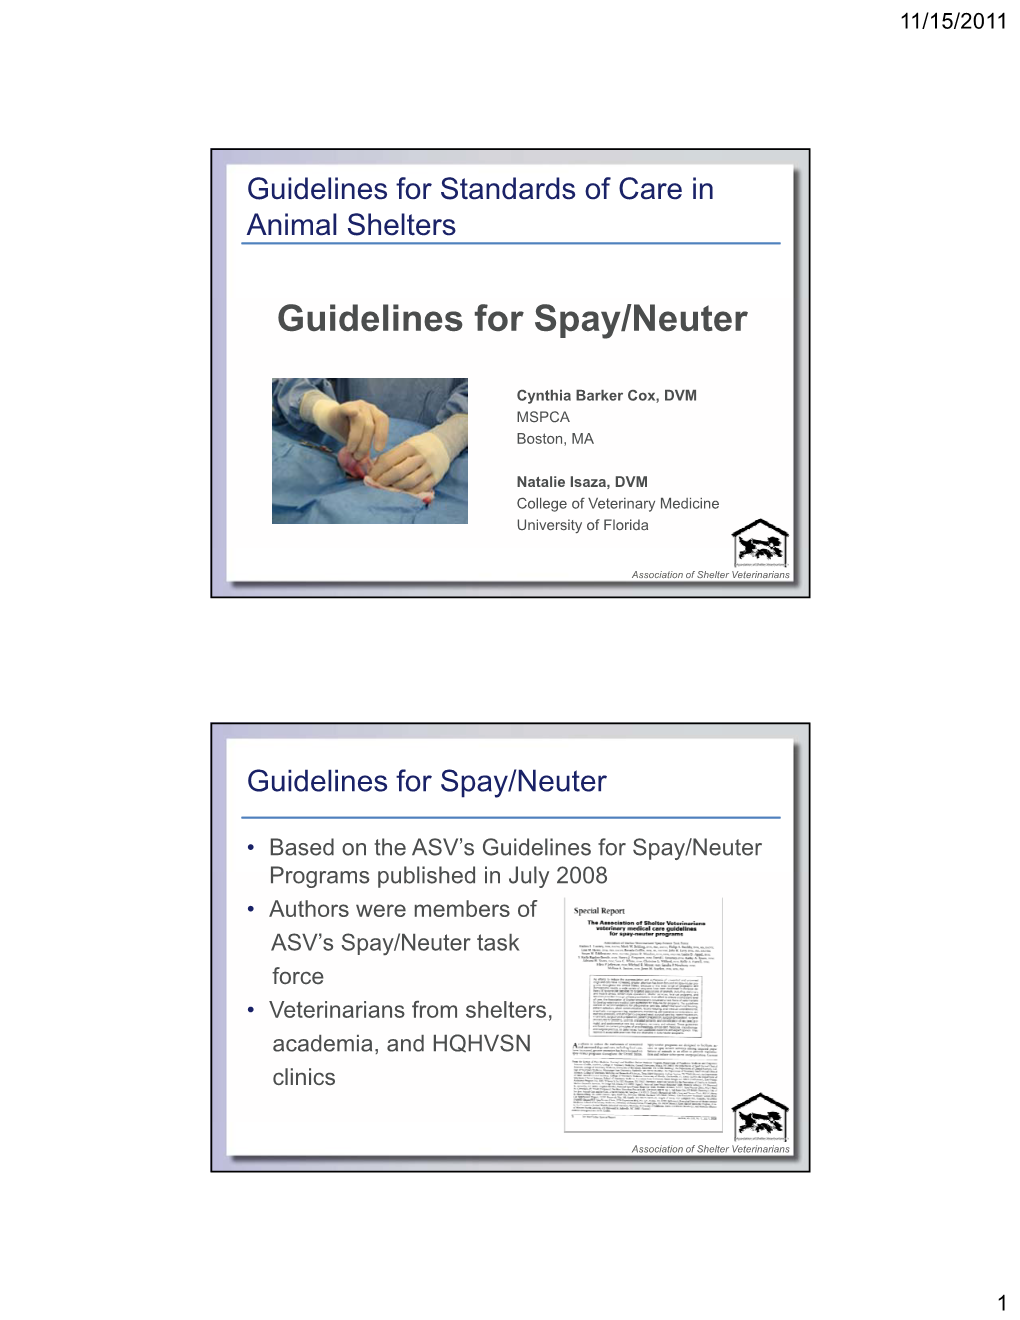 Guidelines for Spay/Neuter